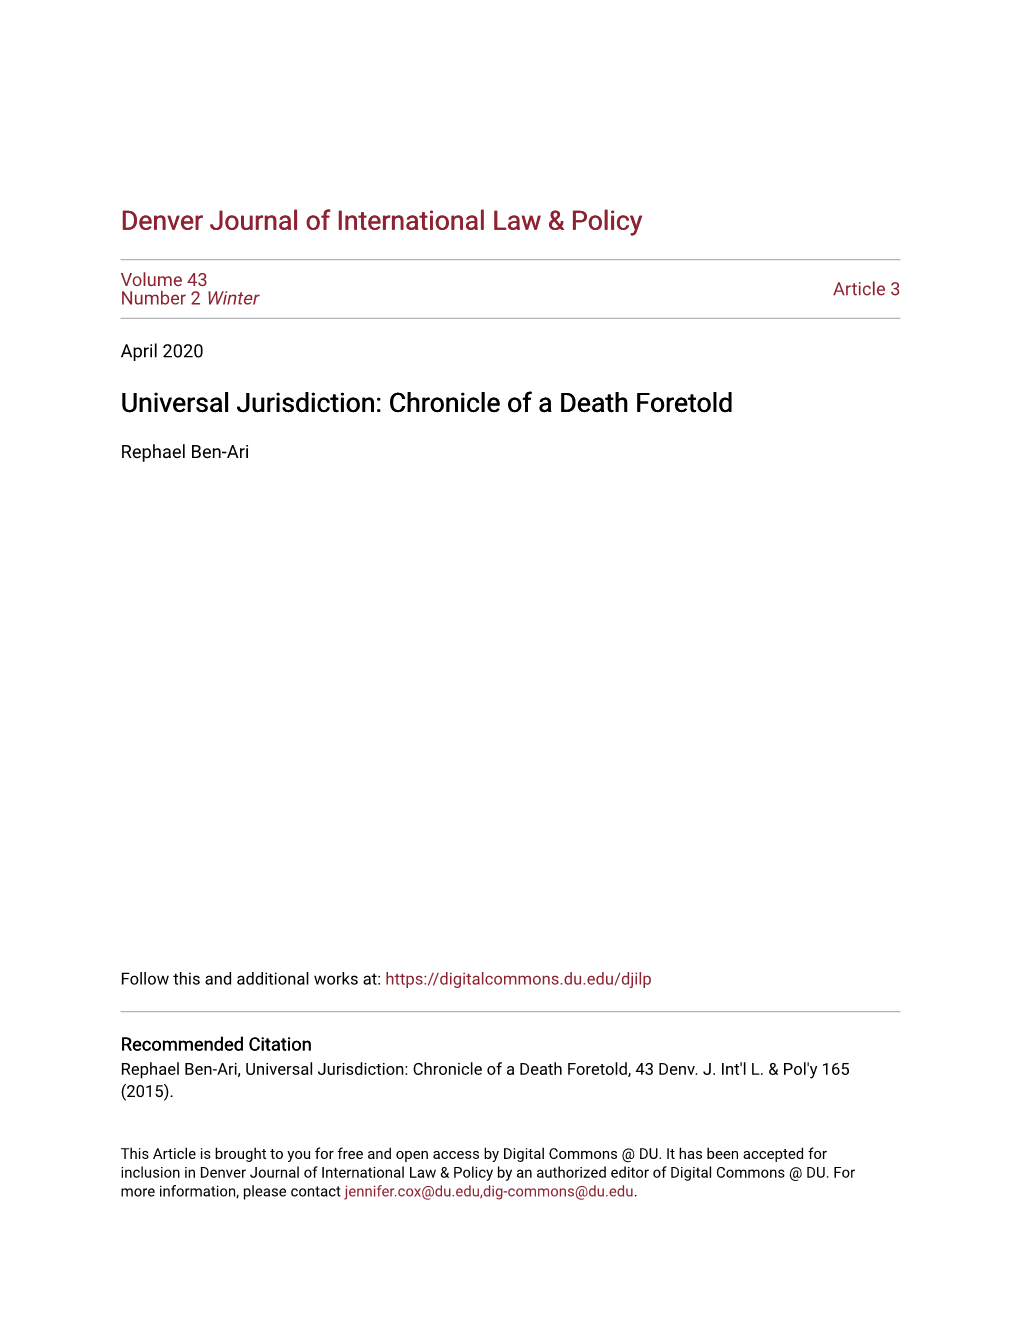 Universal Jurisdiction: Chronicle of a Death Foretold